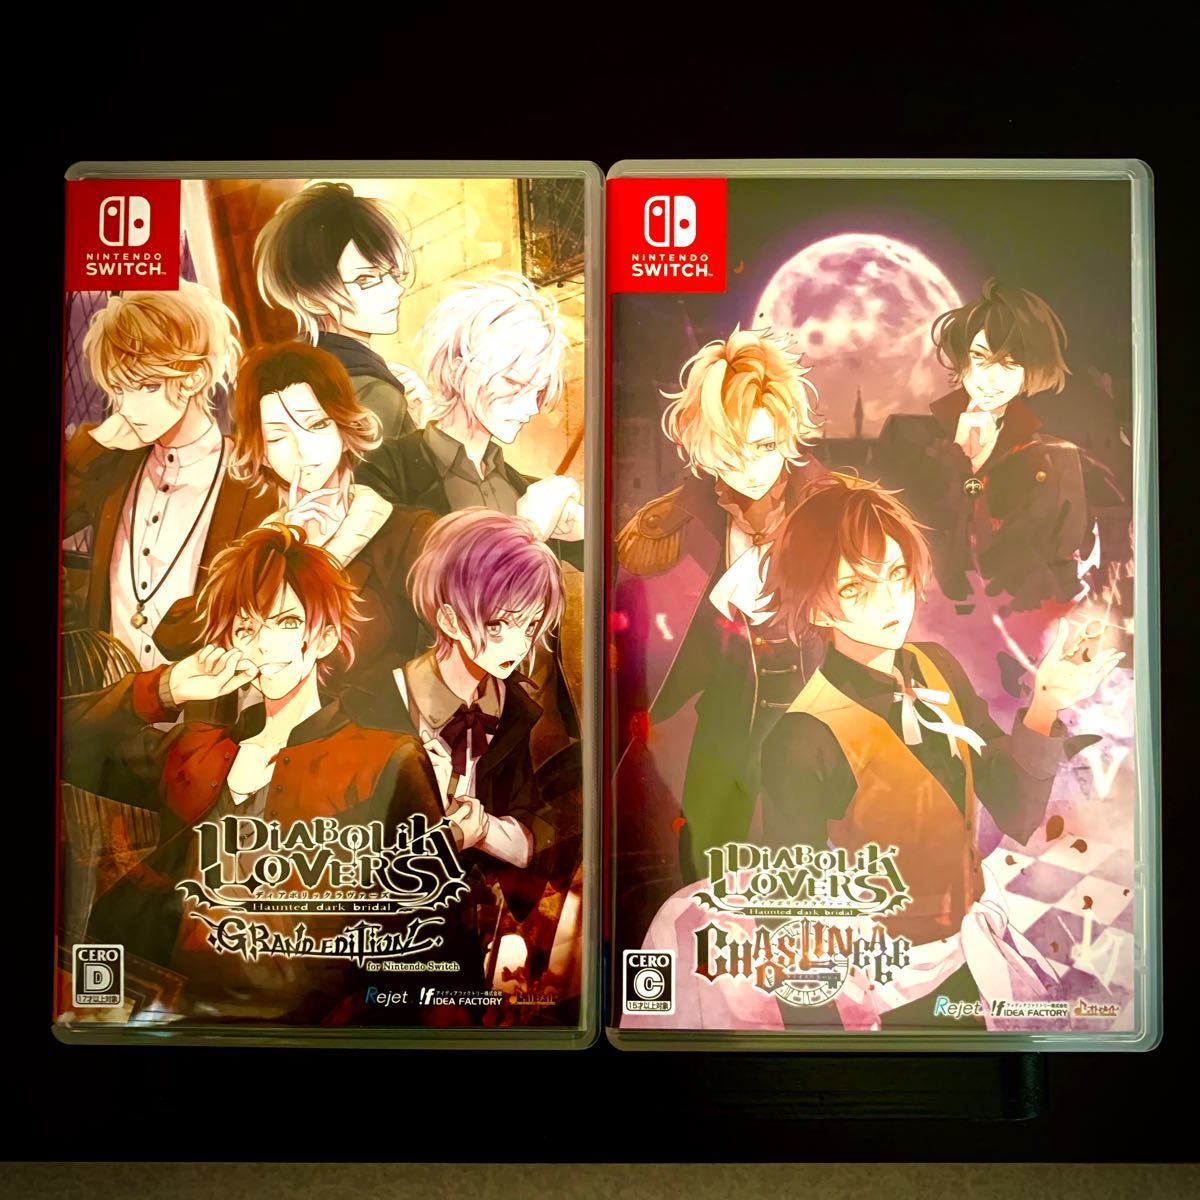 【Switch】 DIABOLIK LOVERS GRAND EDITION ＆ CHAOS LINEAGE [通常版] セット